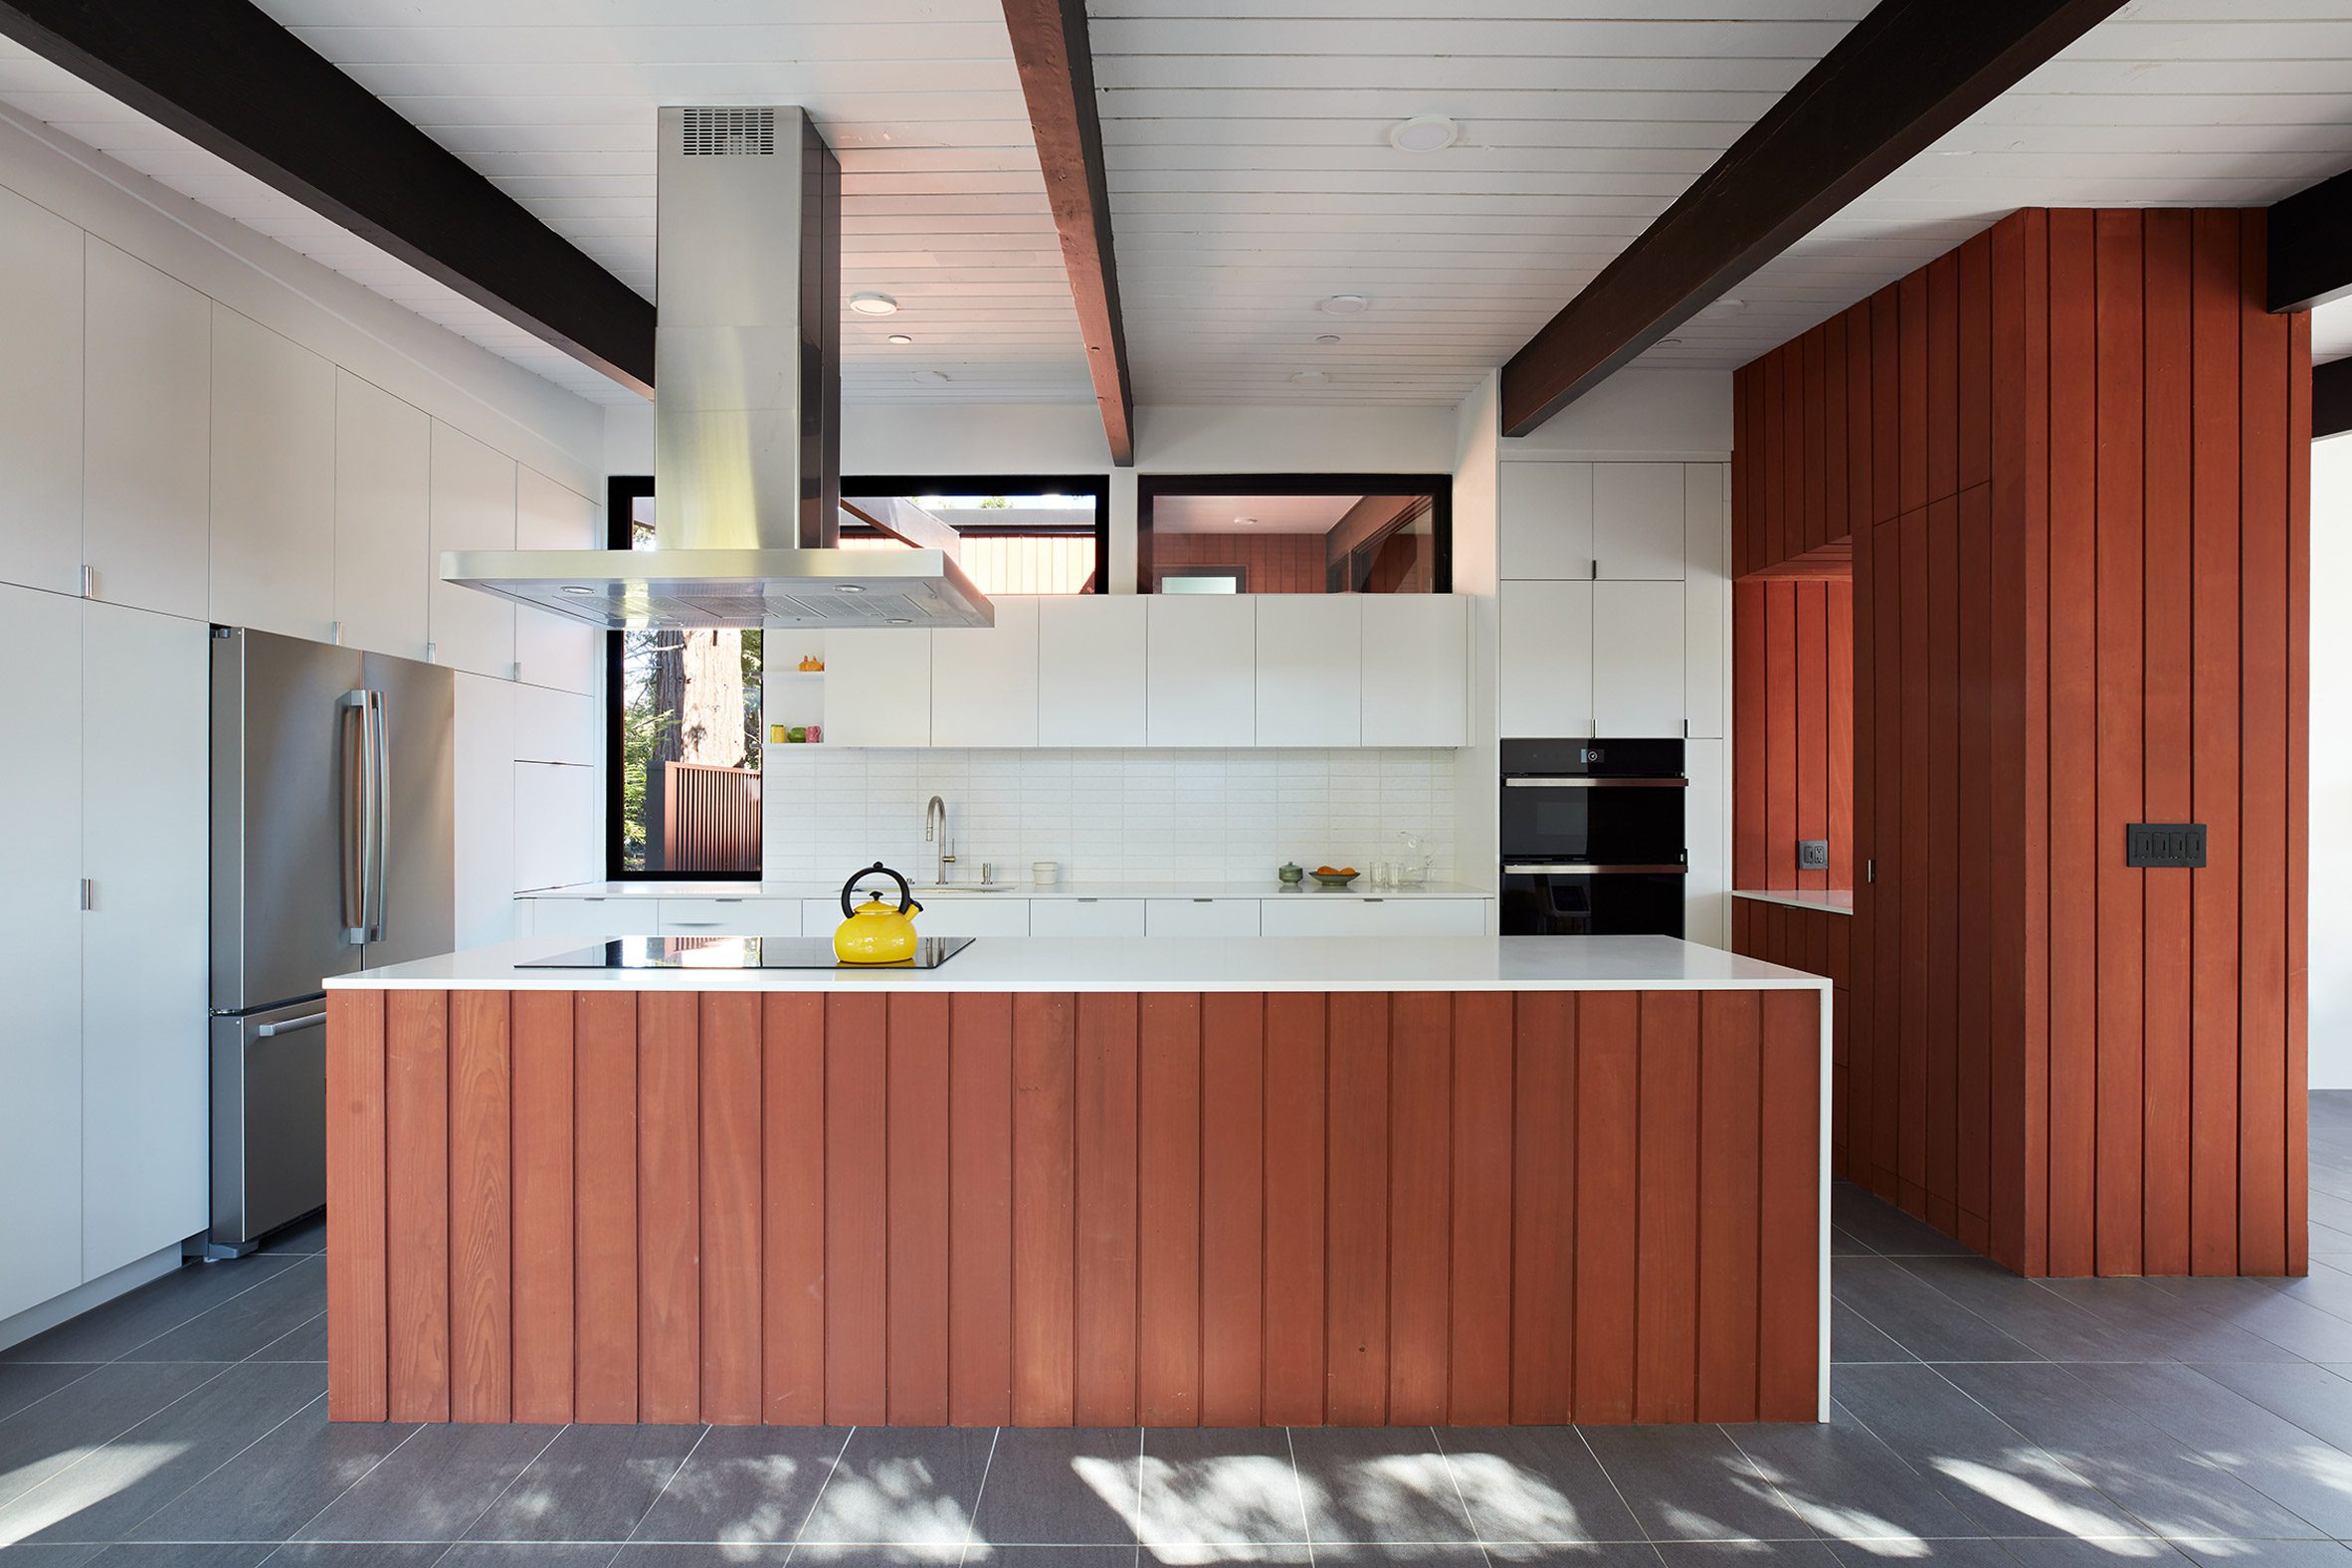 Wooden panelling in the kitchen by Klopf Architecture